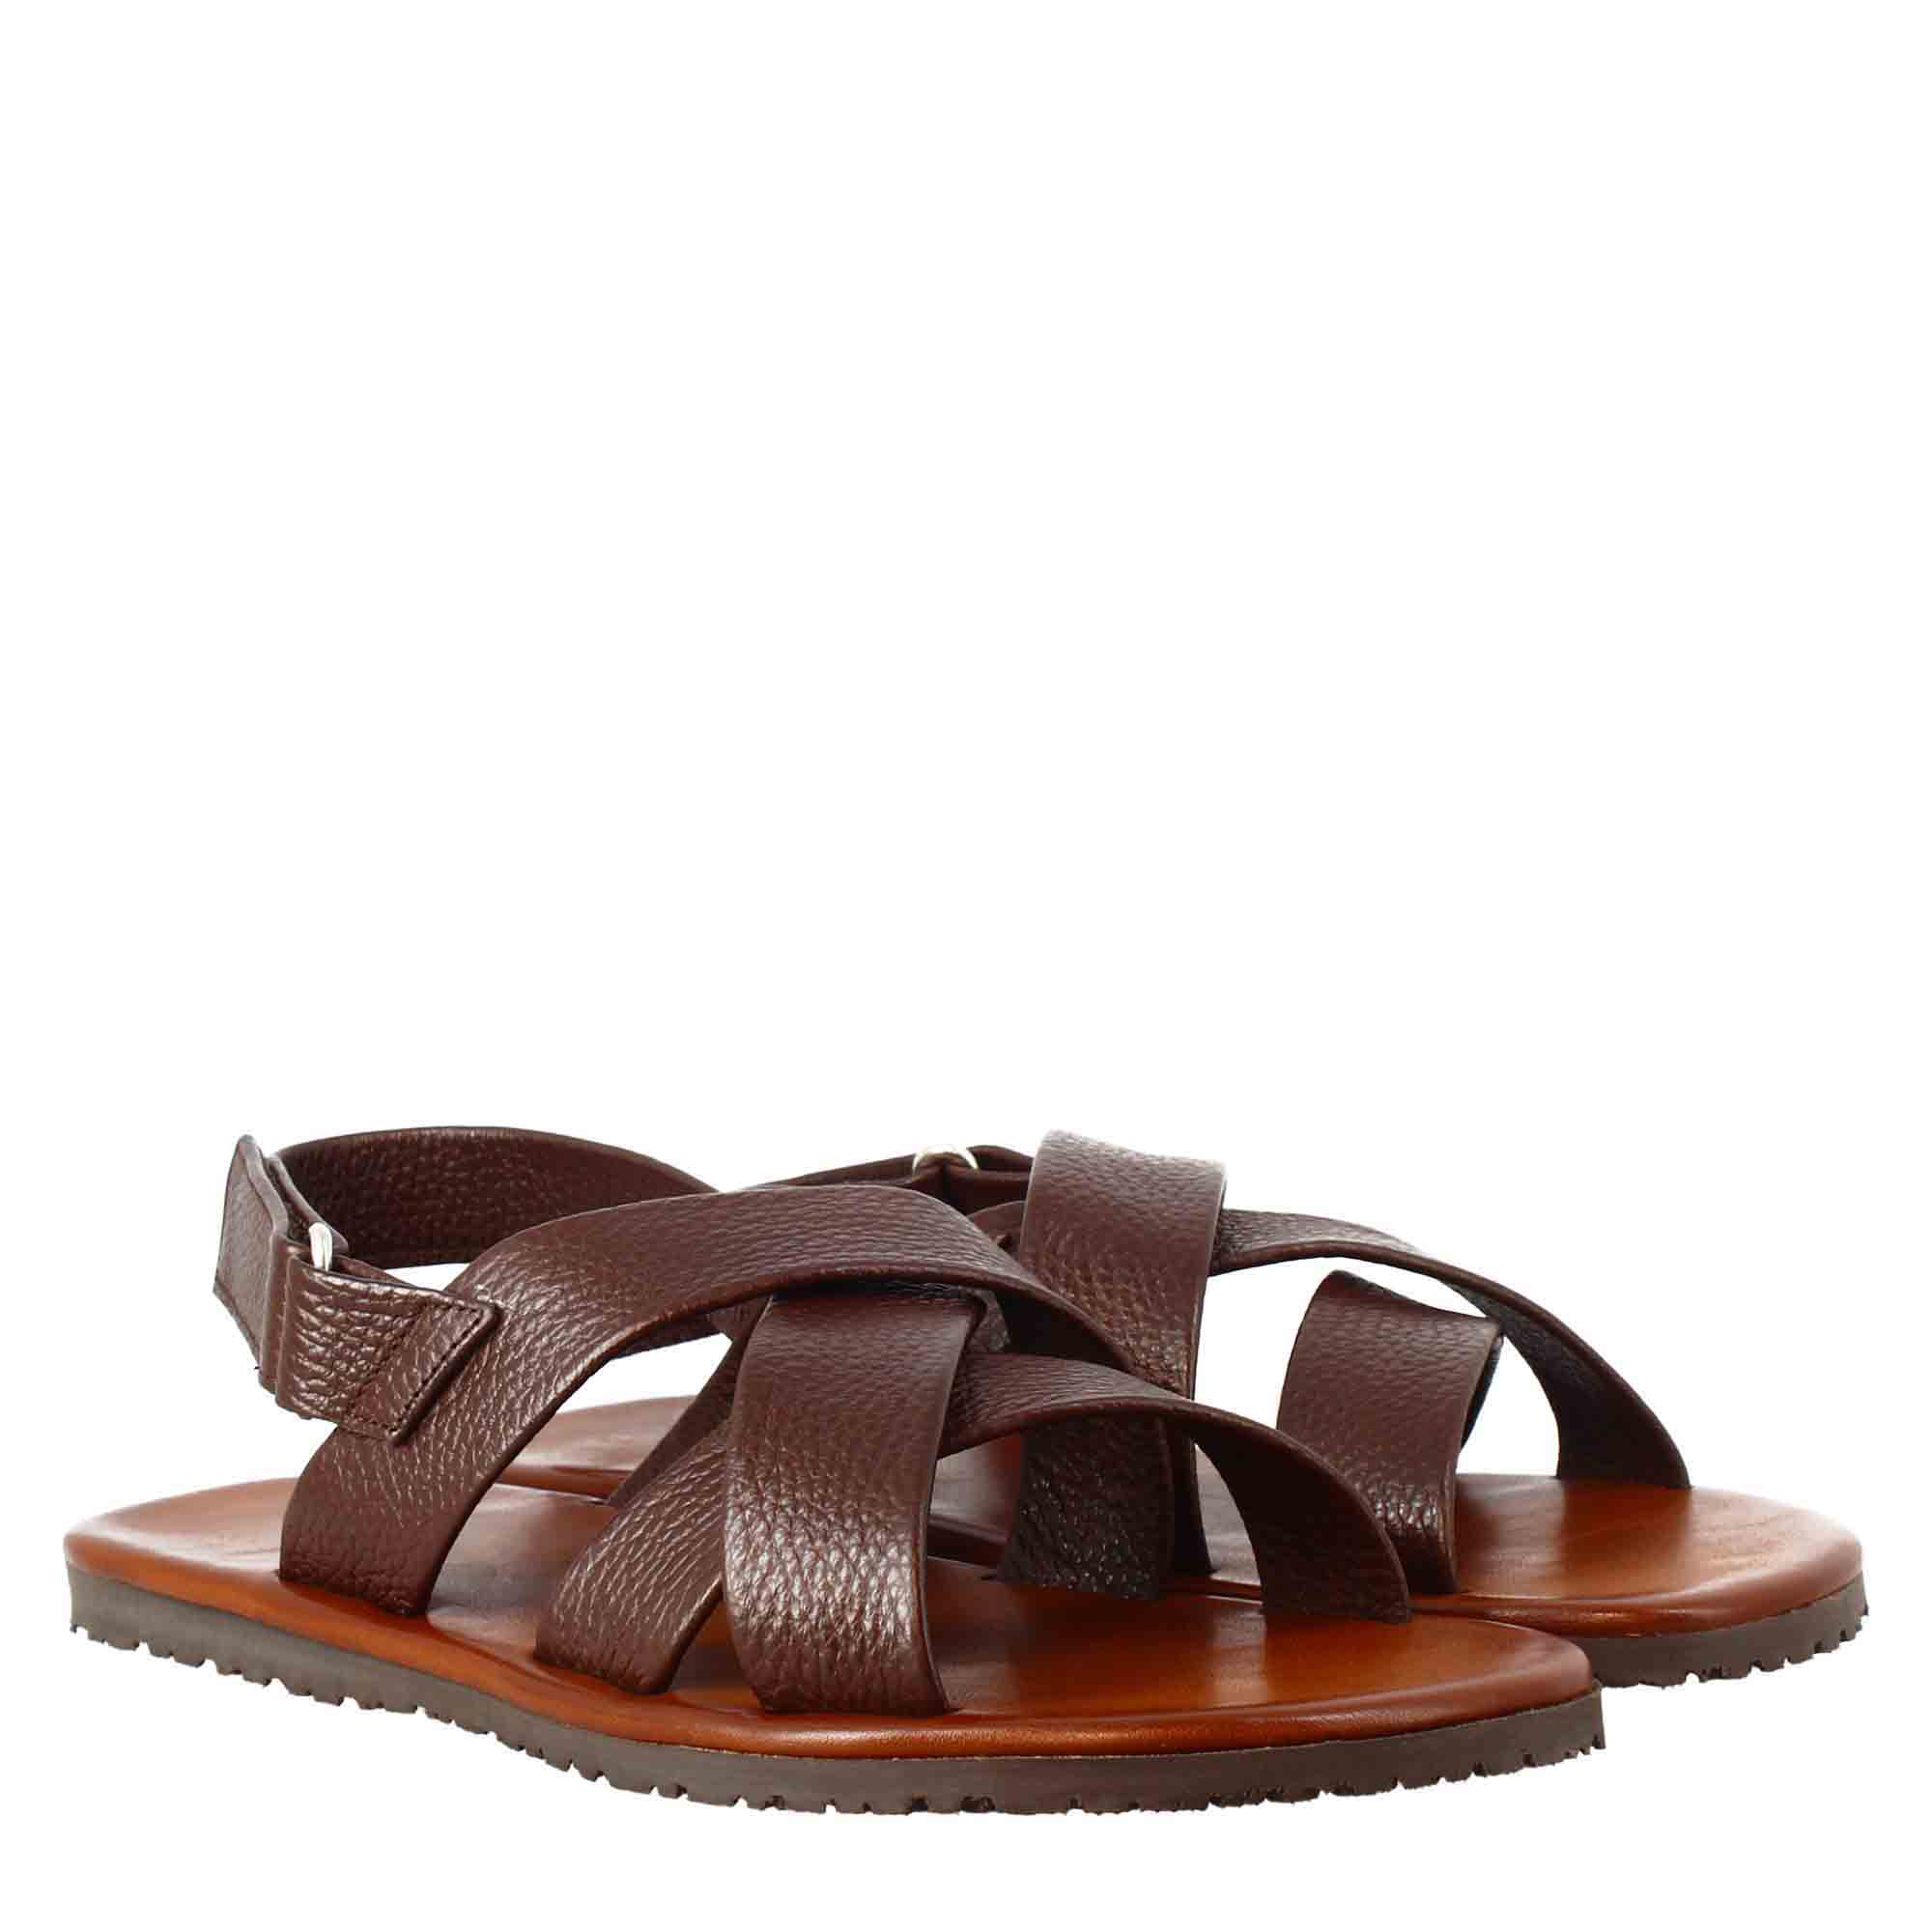 Men's sandals in Brown leather with velcro closure